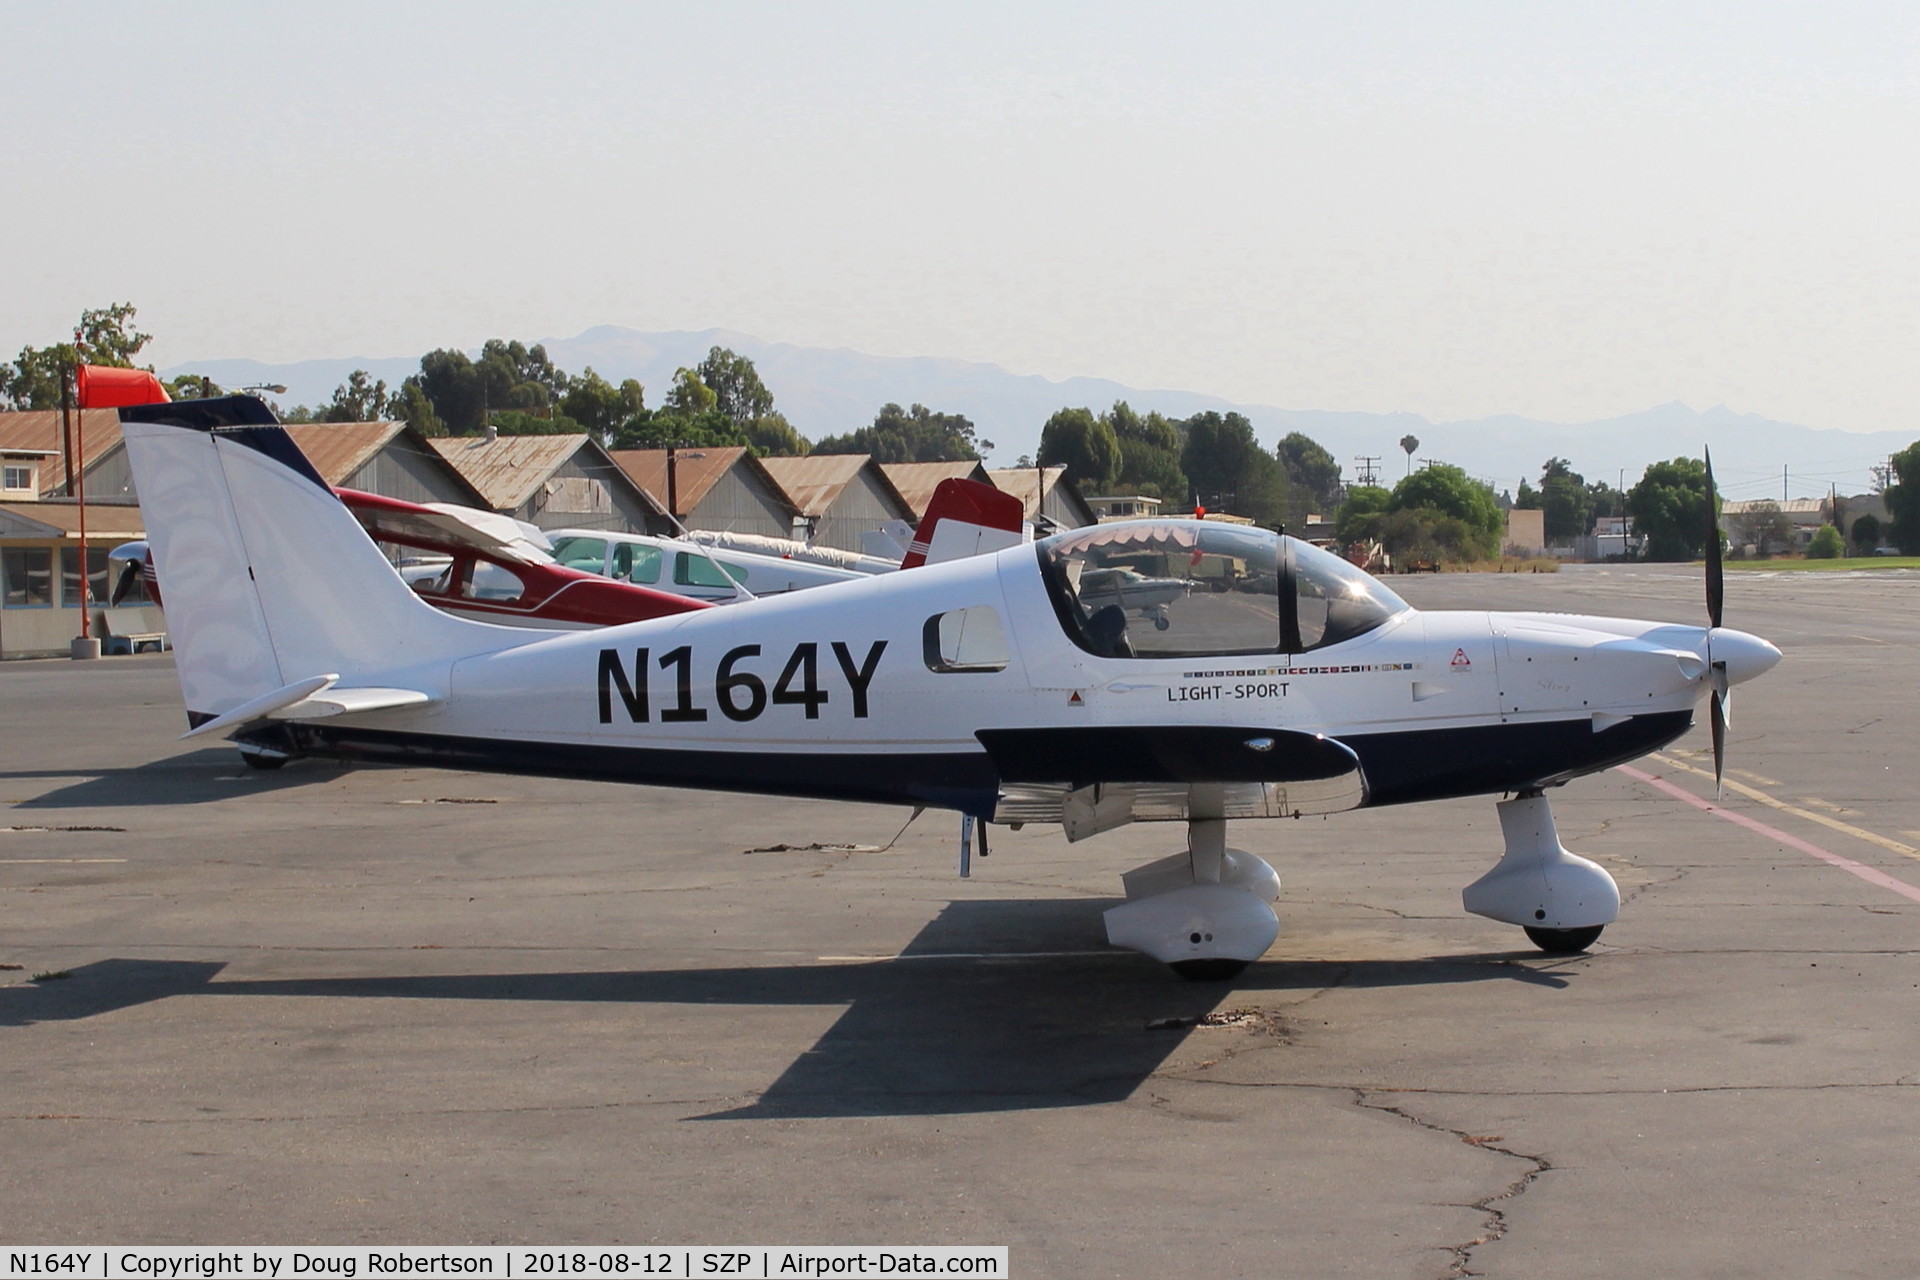 N164Y, 2013 The Airplane Factory Sling 2 C/N 130, 2013 The Airplane Factory Pty Ltd SLING 2 S-LSA from South Africa, Rotax 912IS 100 Hp, returning slick visitor-see all photos